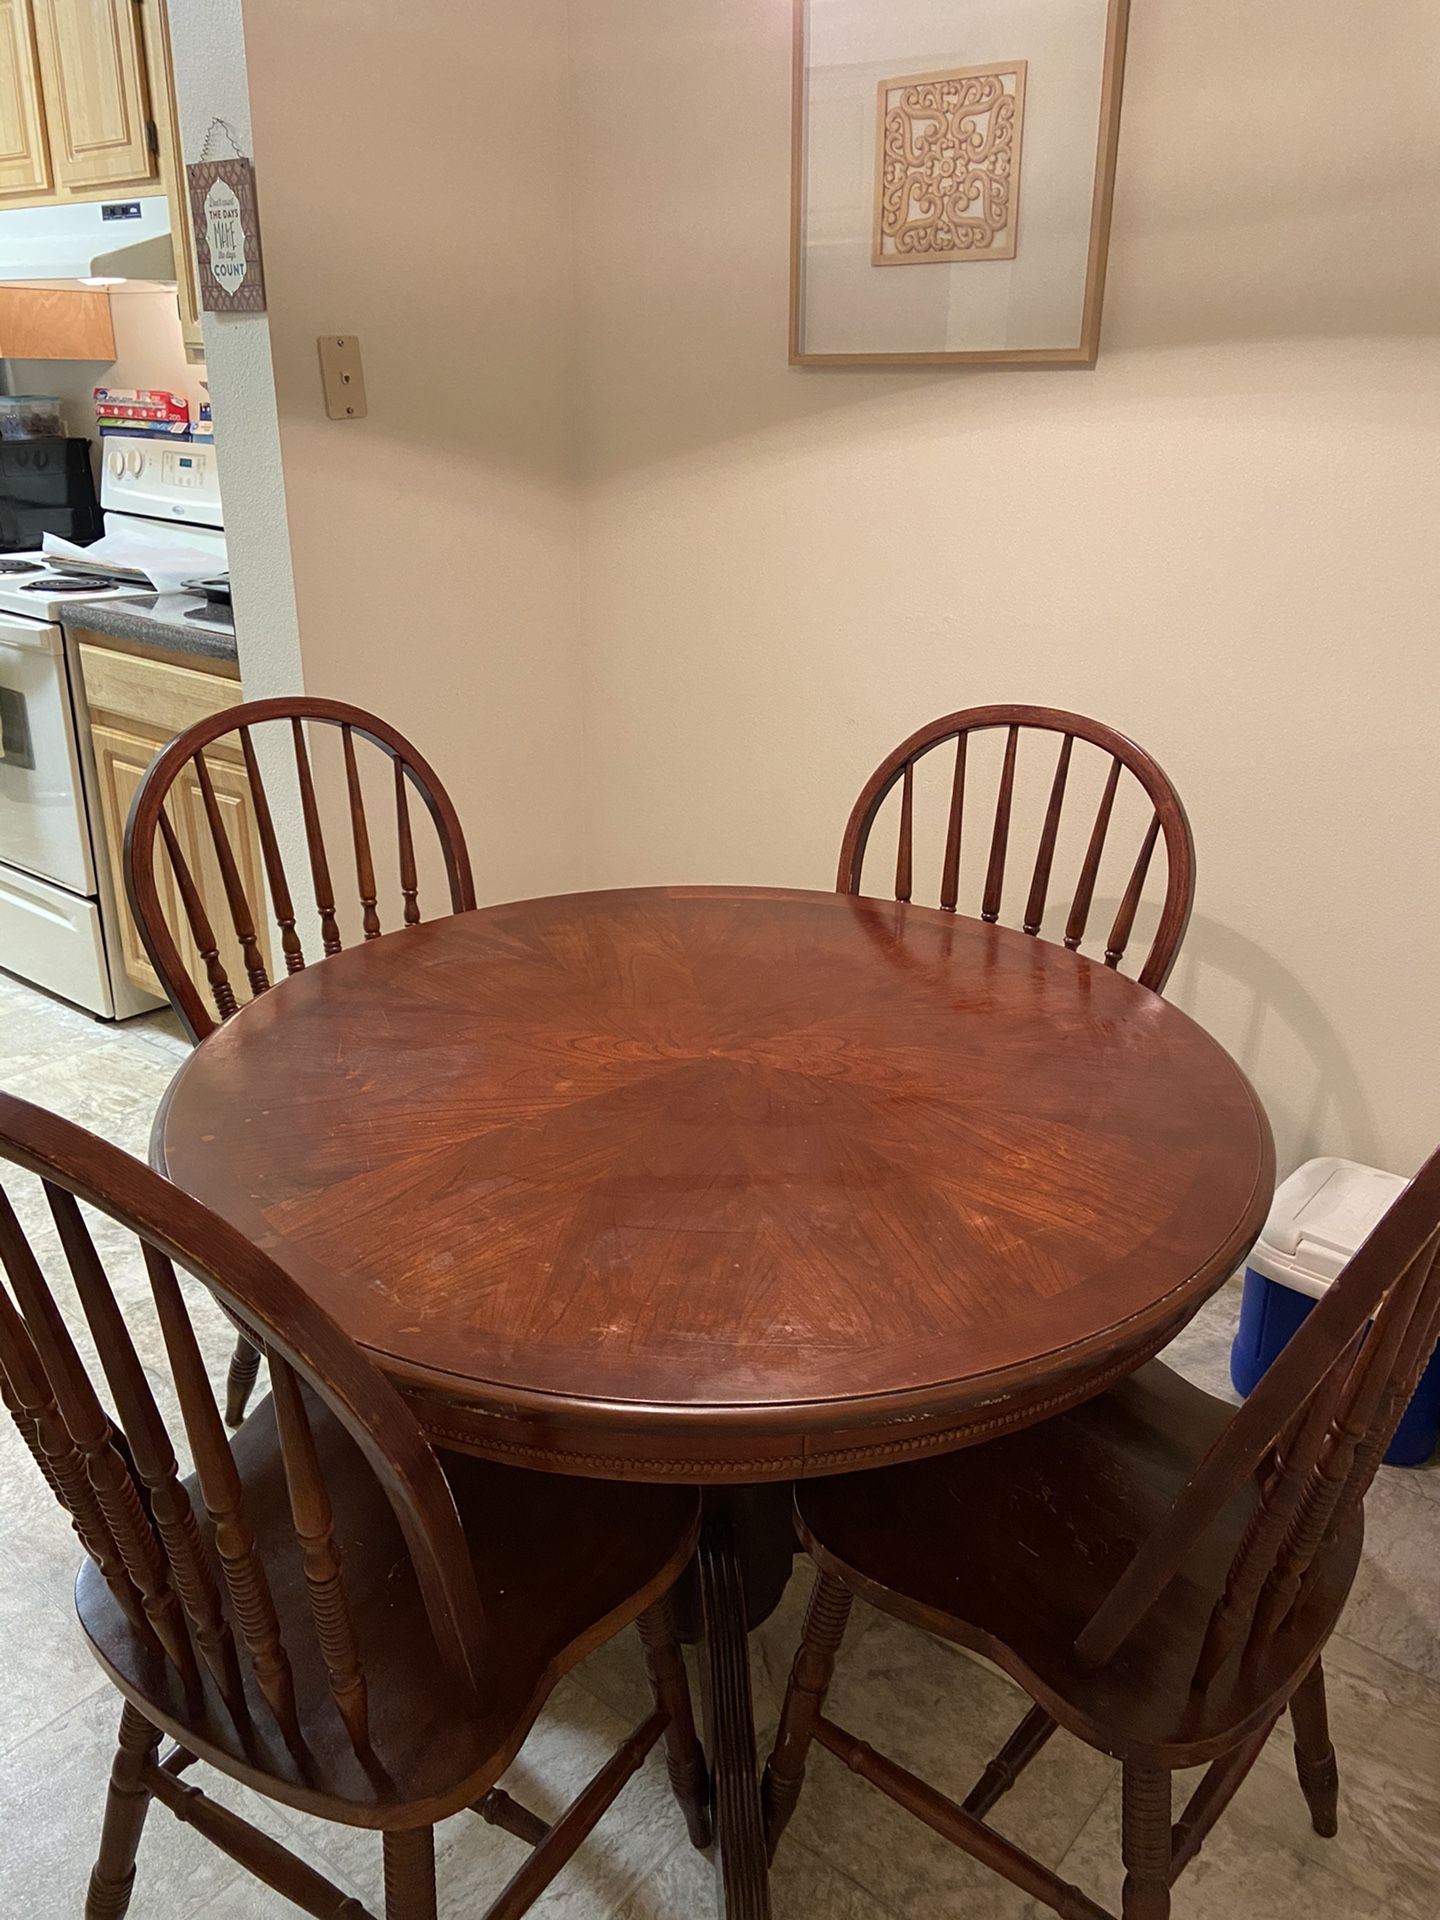 Wood round kitchen table with 4 chairs